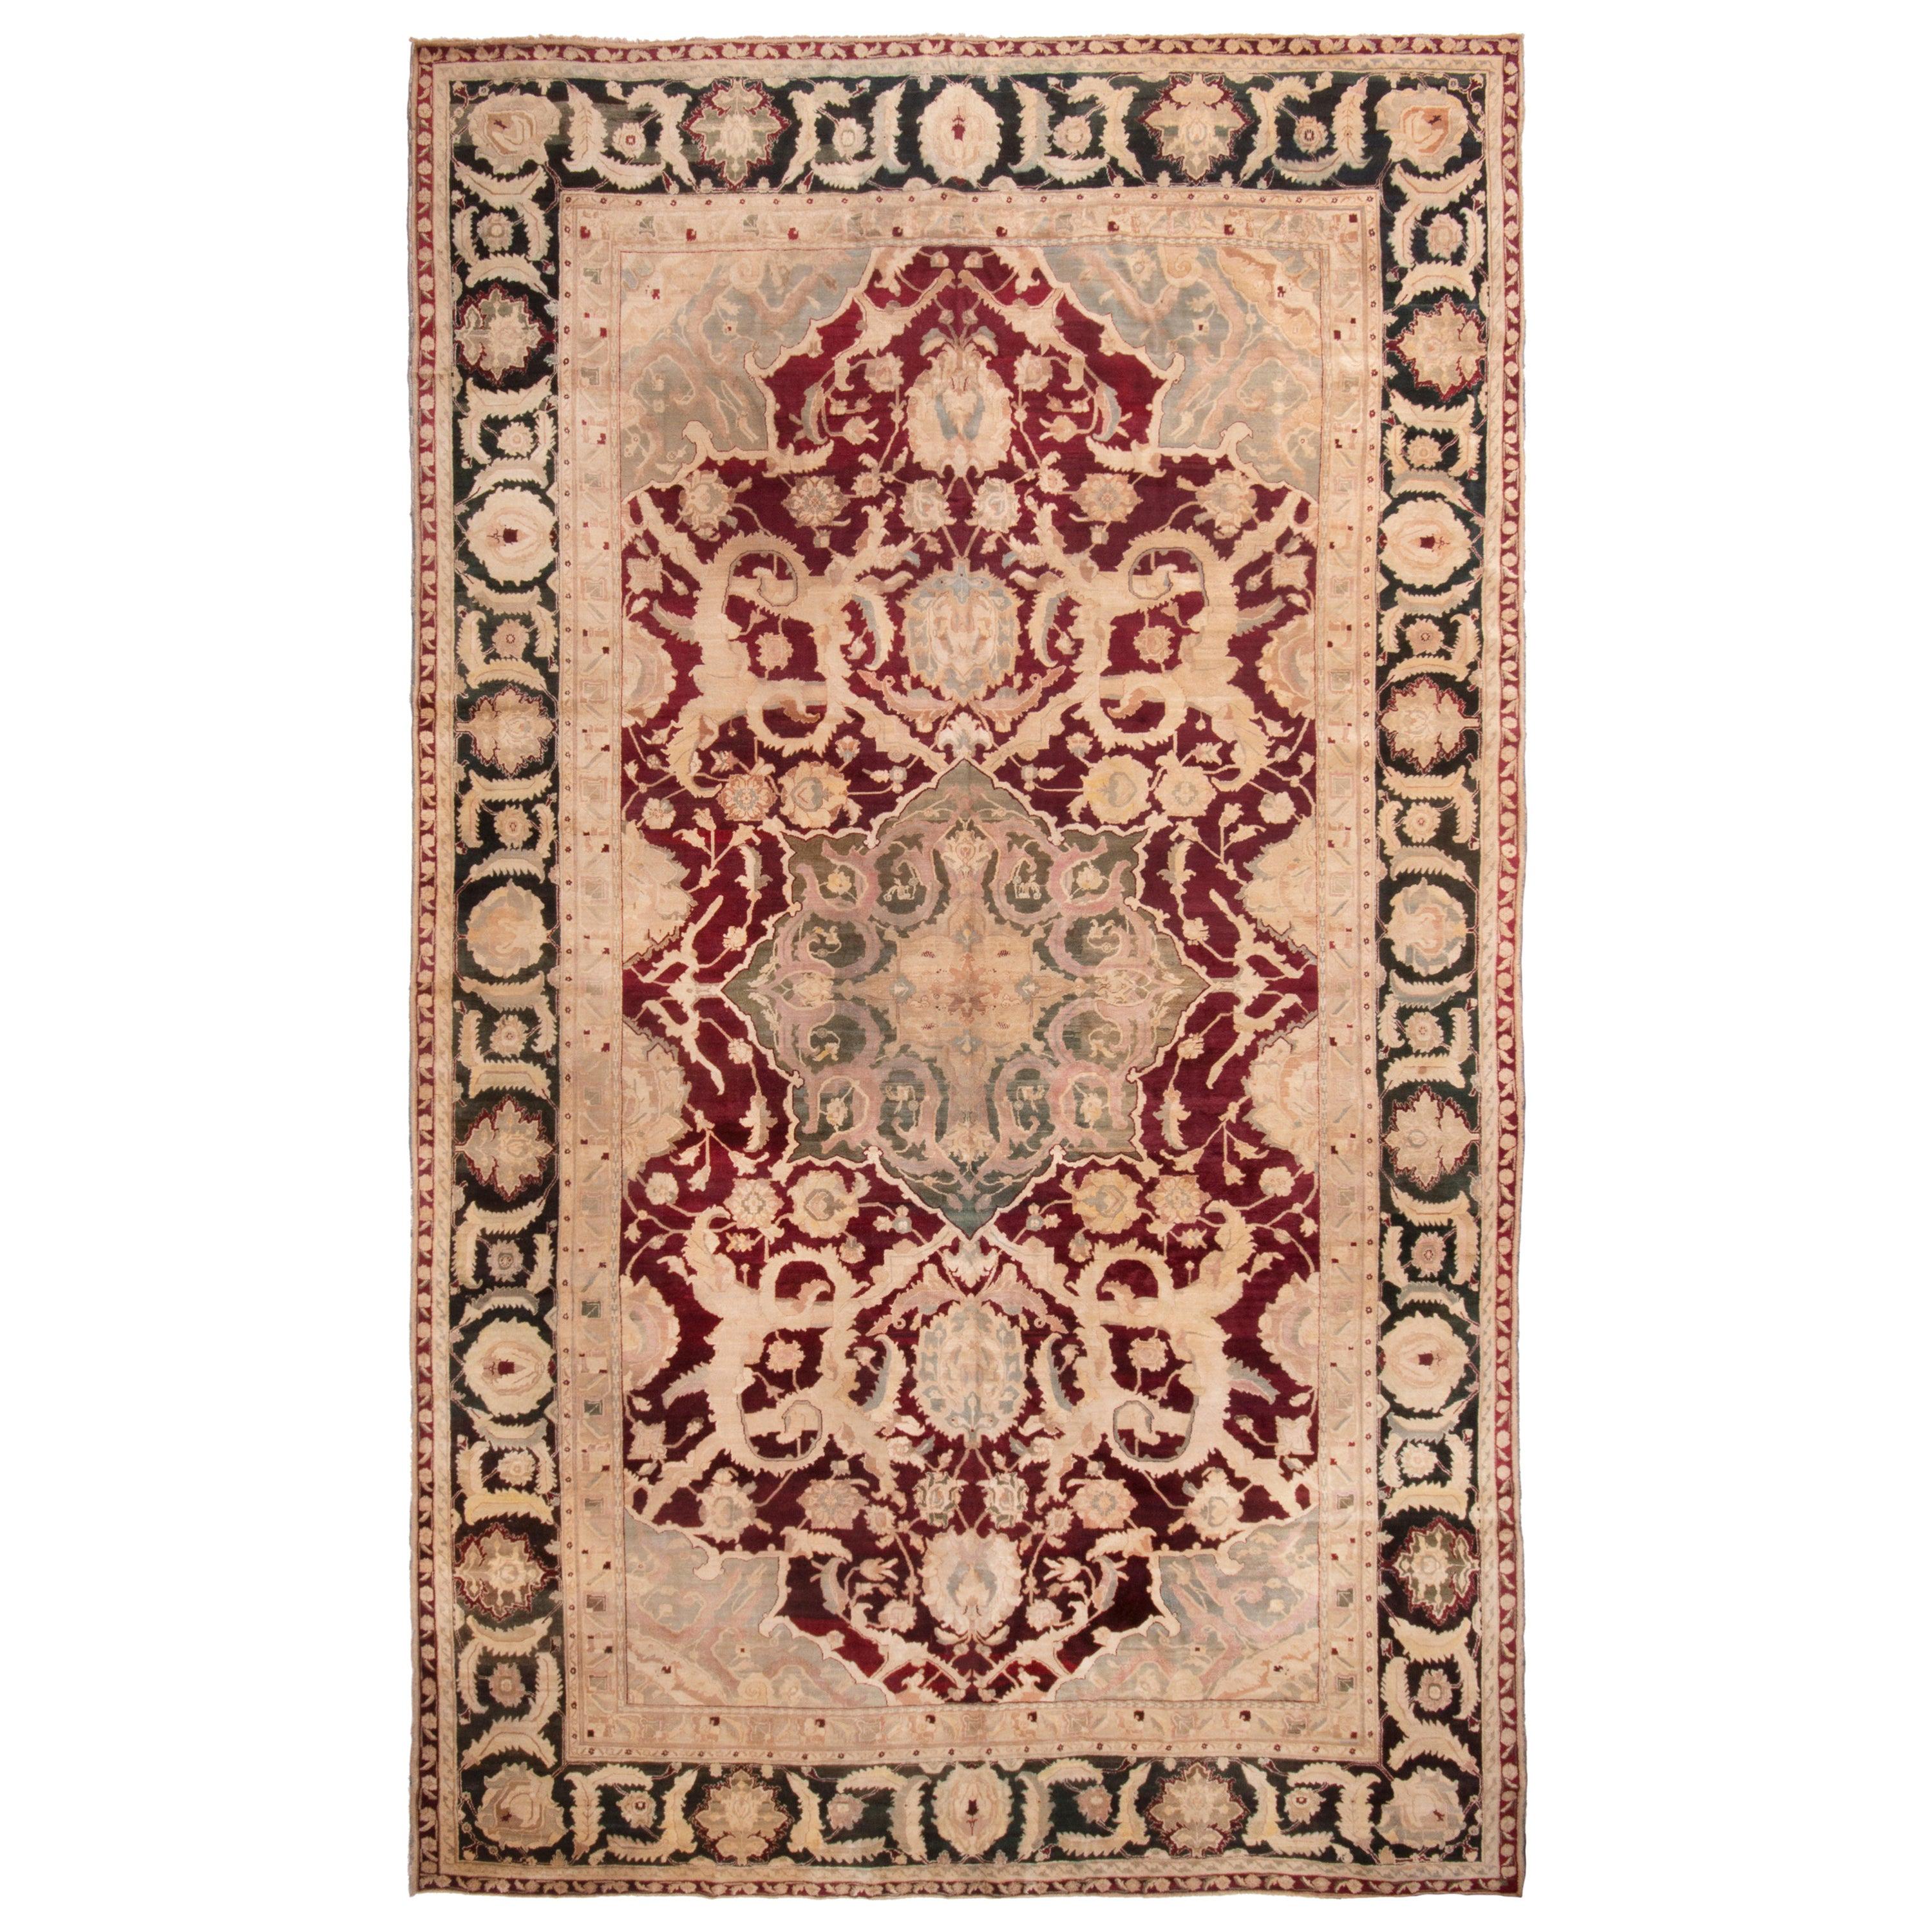 Antique Agra Burgundy Wool Rug with All-Over Floral Patterns